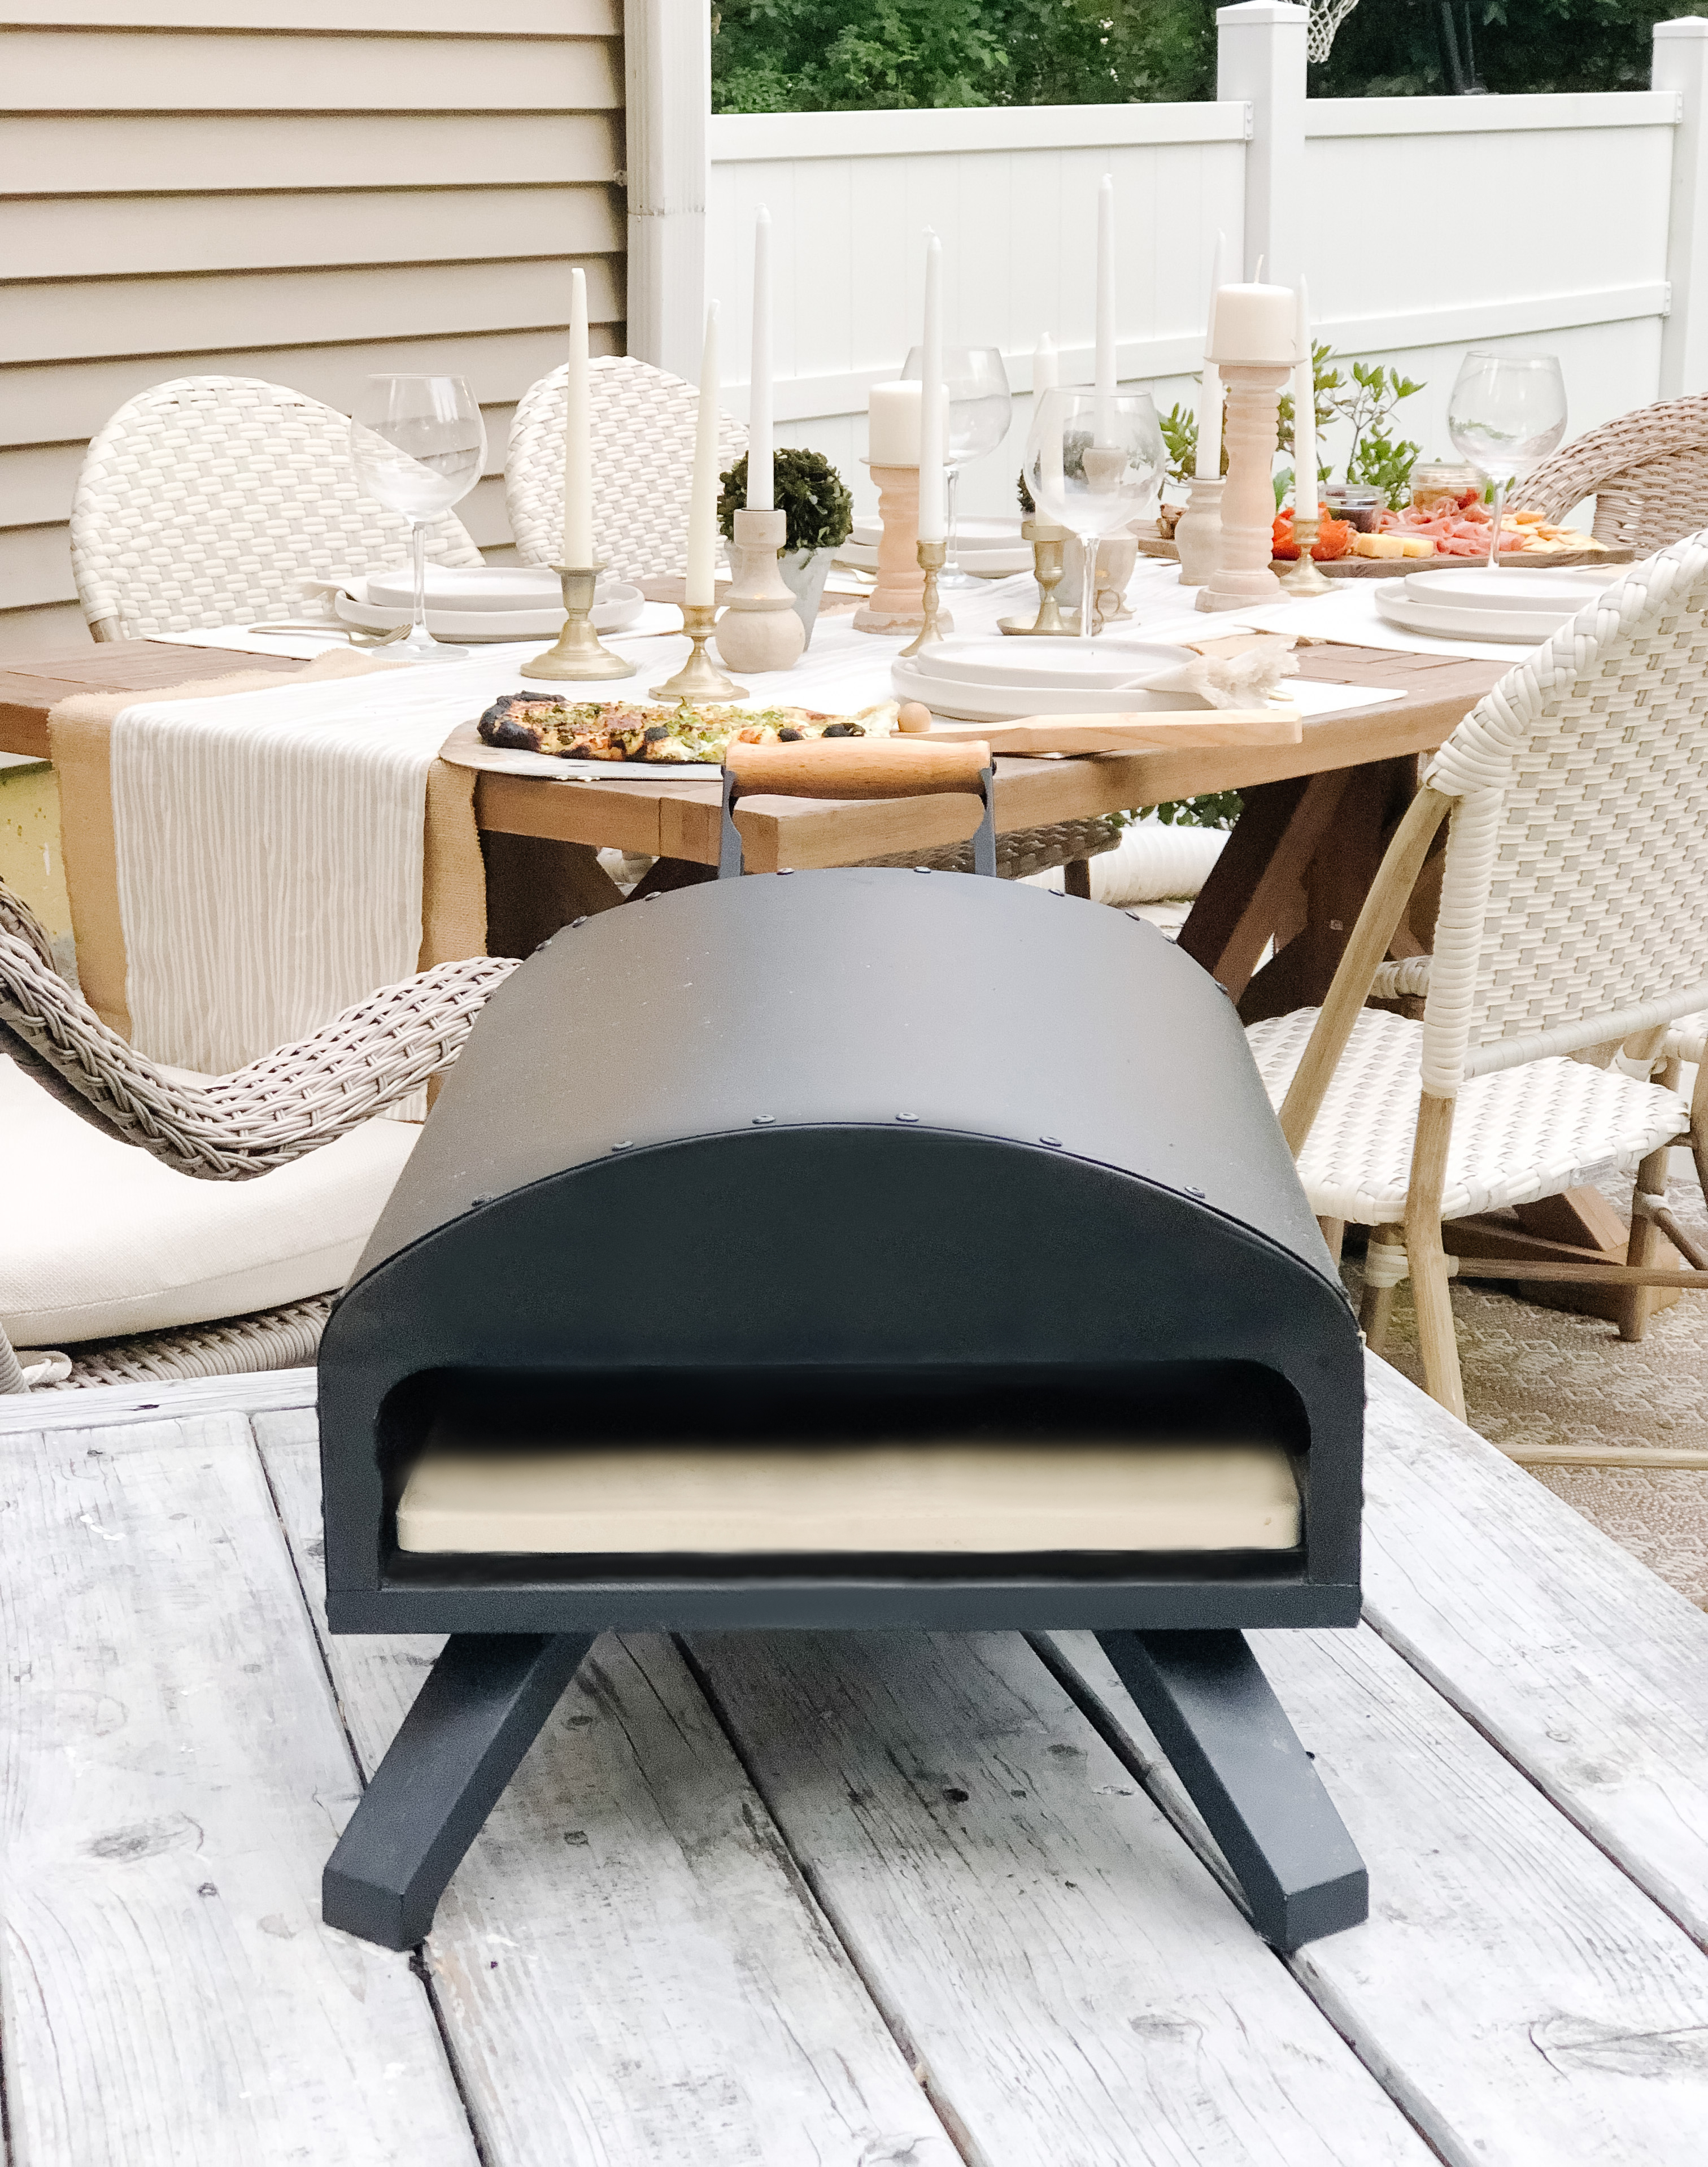 Let’s Make A Pizza Outdoors with a Bertello Pizza Oven: A Review of the Shark Tank Product